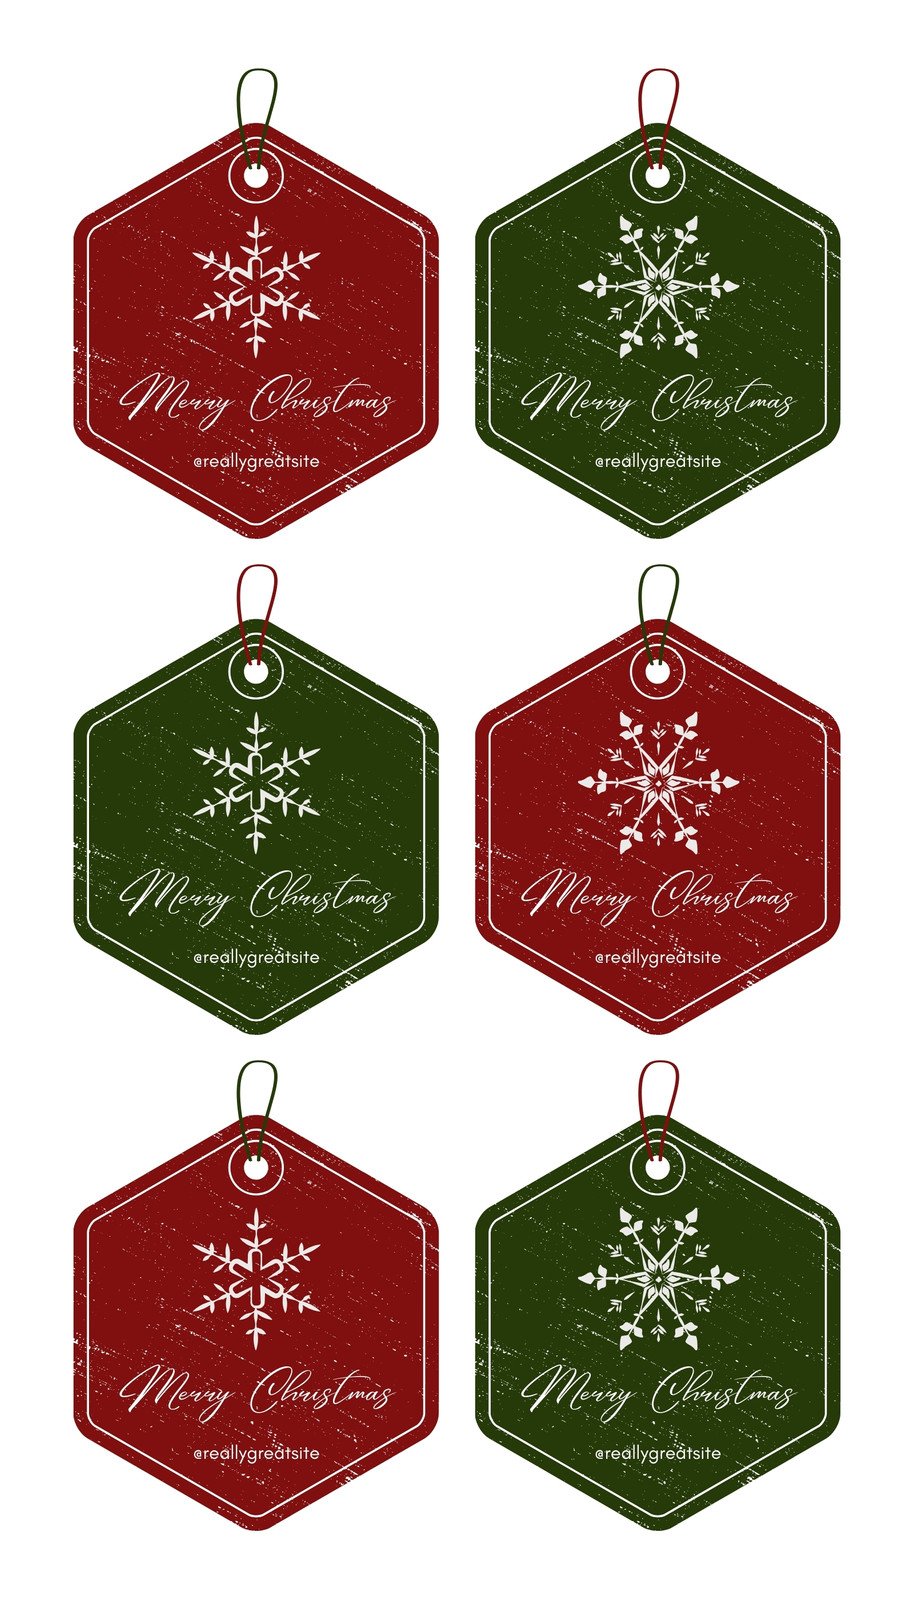 Let's Make This Christmas: Wooden Gift Tags | Artcuts